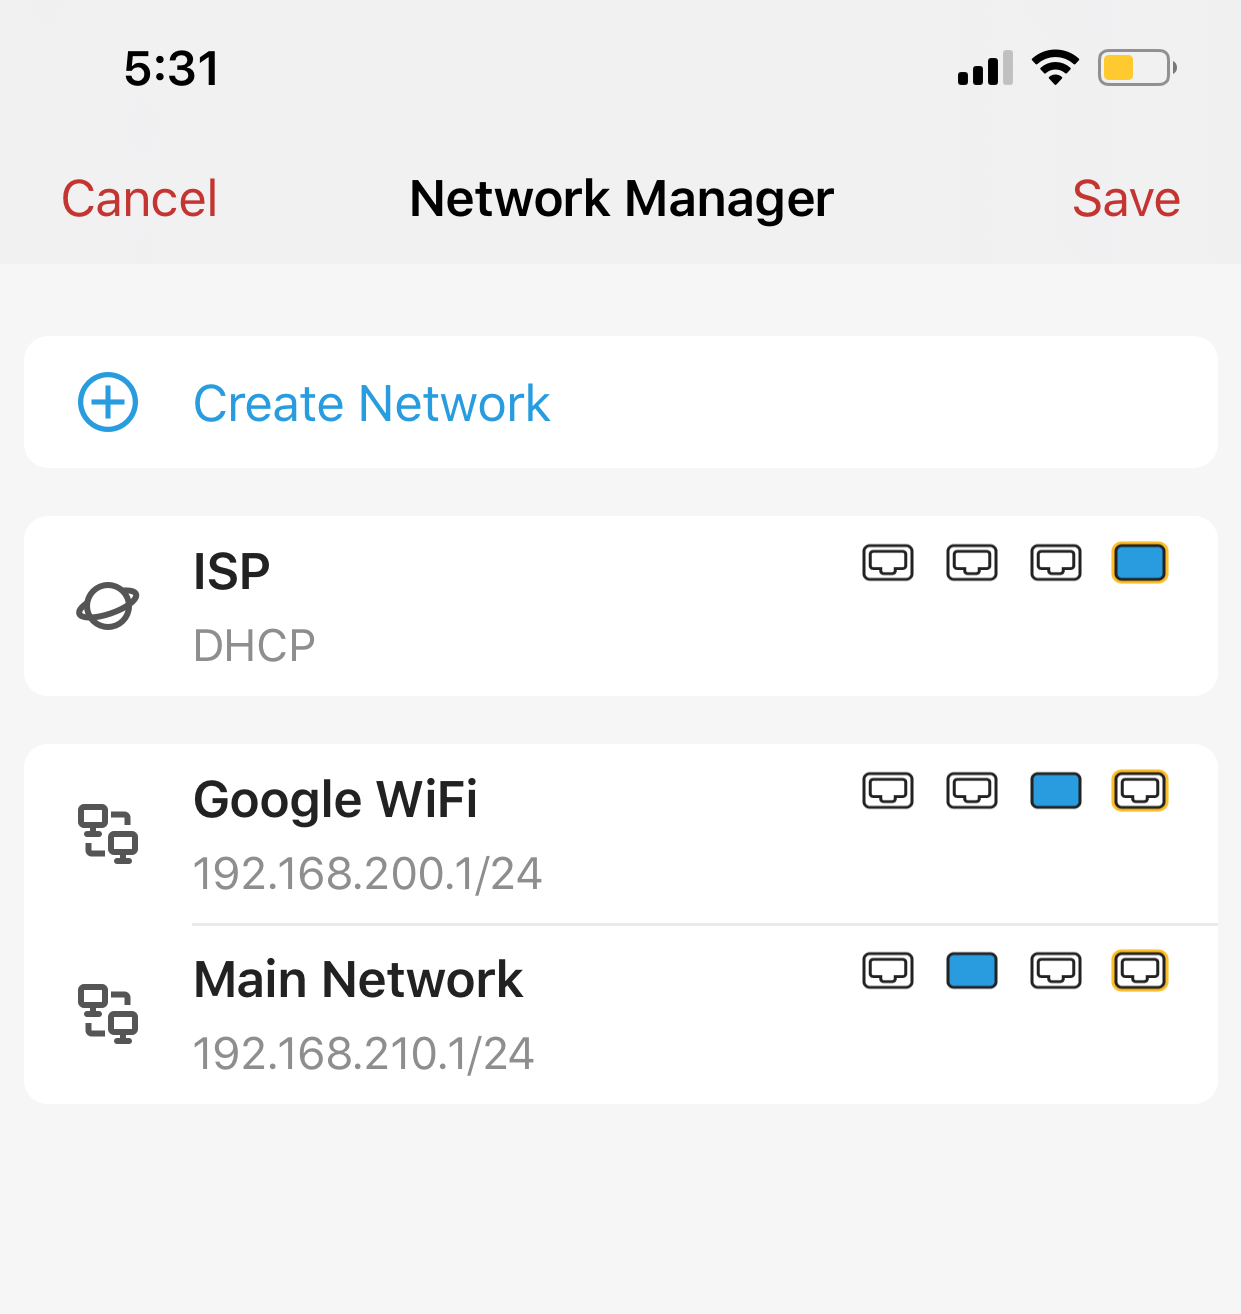 Step 1: Set up Local Newtorks in Gold - Firewalla Gold - Google Wifi or Nest Wifi Mesh Network